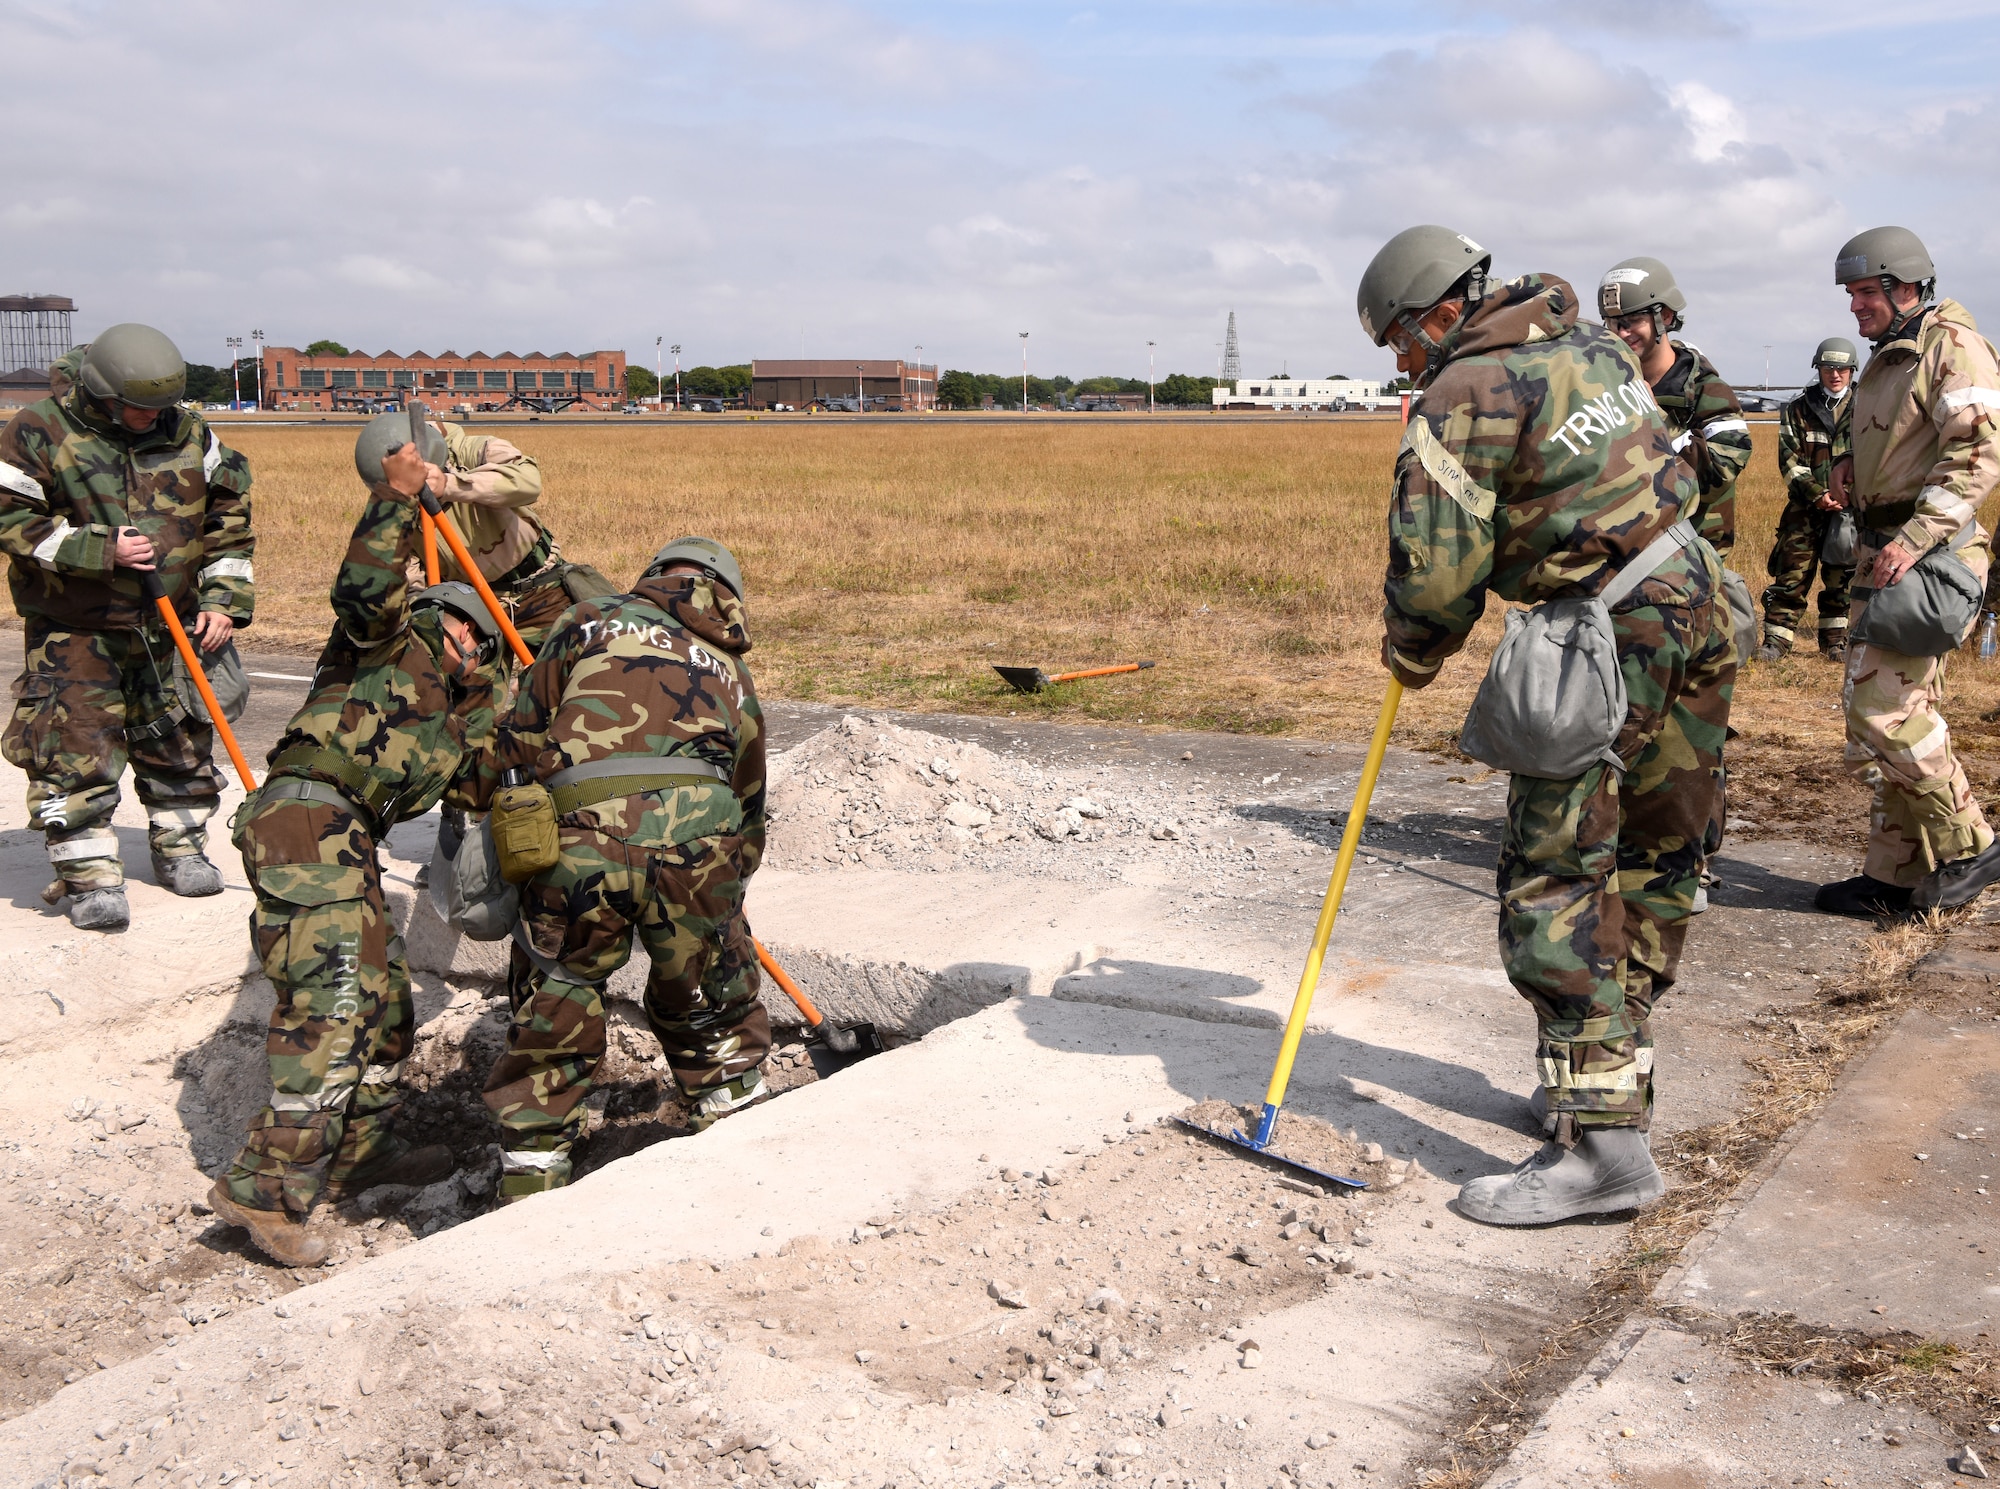 U.S. Air Force Airmen from the 100th Civil Engineer Squadron clear broken concrete during a simulated damaged runway repair as part of a chemical, biological, radiological, nuclear and explosives exercise at Royal Air Force Mildenhall, England, Aug. 17, 2022. The 100th CES Airmen used a variety of equipment including excavators and loaders to practice removing damaged concrete and base course on a simulated runway. The 100th Air Refueling Wing commander, Col. Gene Jacobus, right, visited the Airmen to watch as they practiced repair, break up and removal of concrete, before mixing and pouring new, quick-drying concrete and levelling it. (U.S. Air Force photo by Karen Abeyasekere)